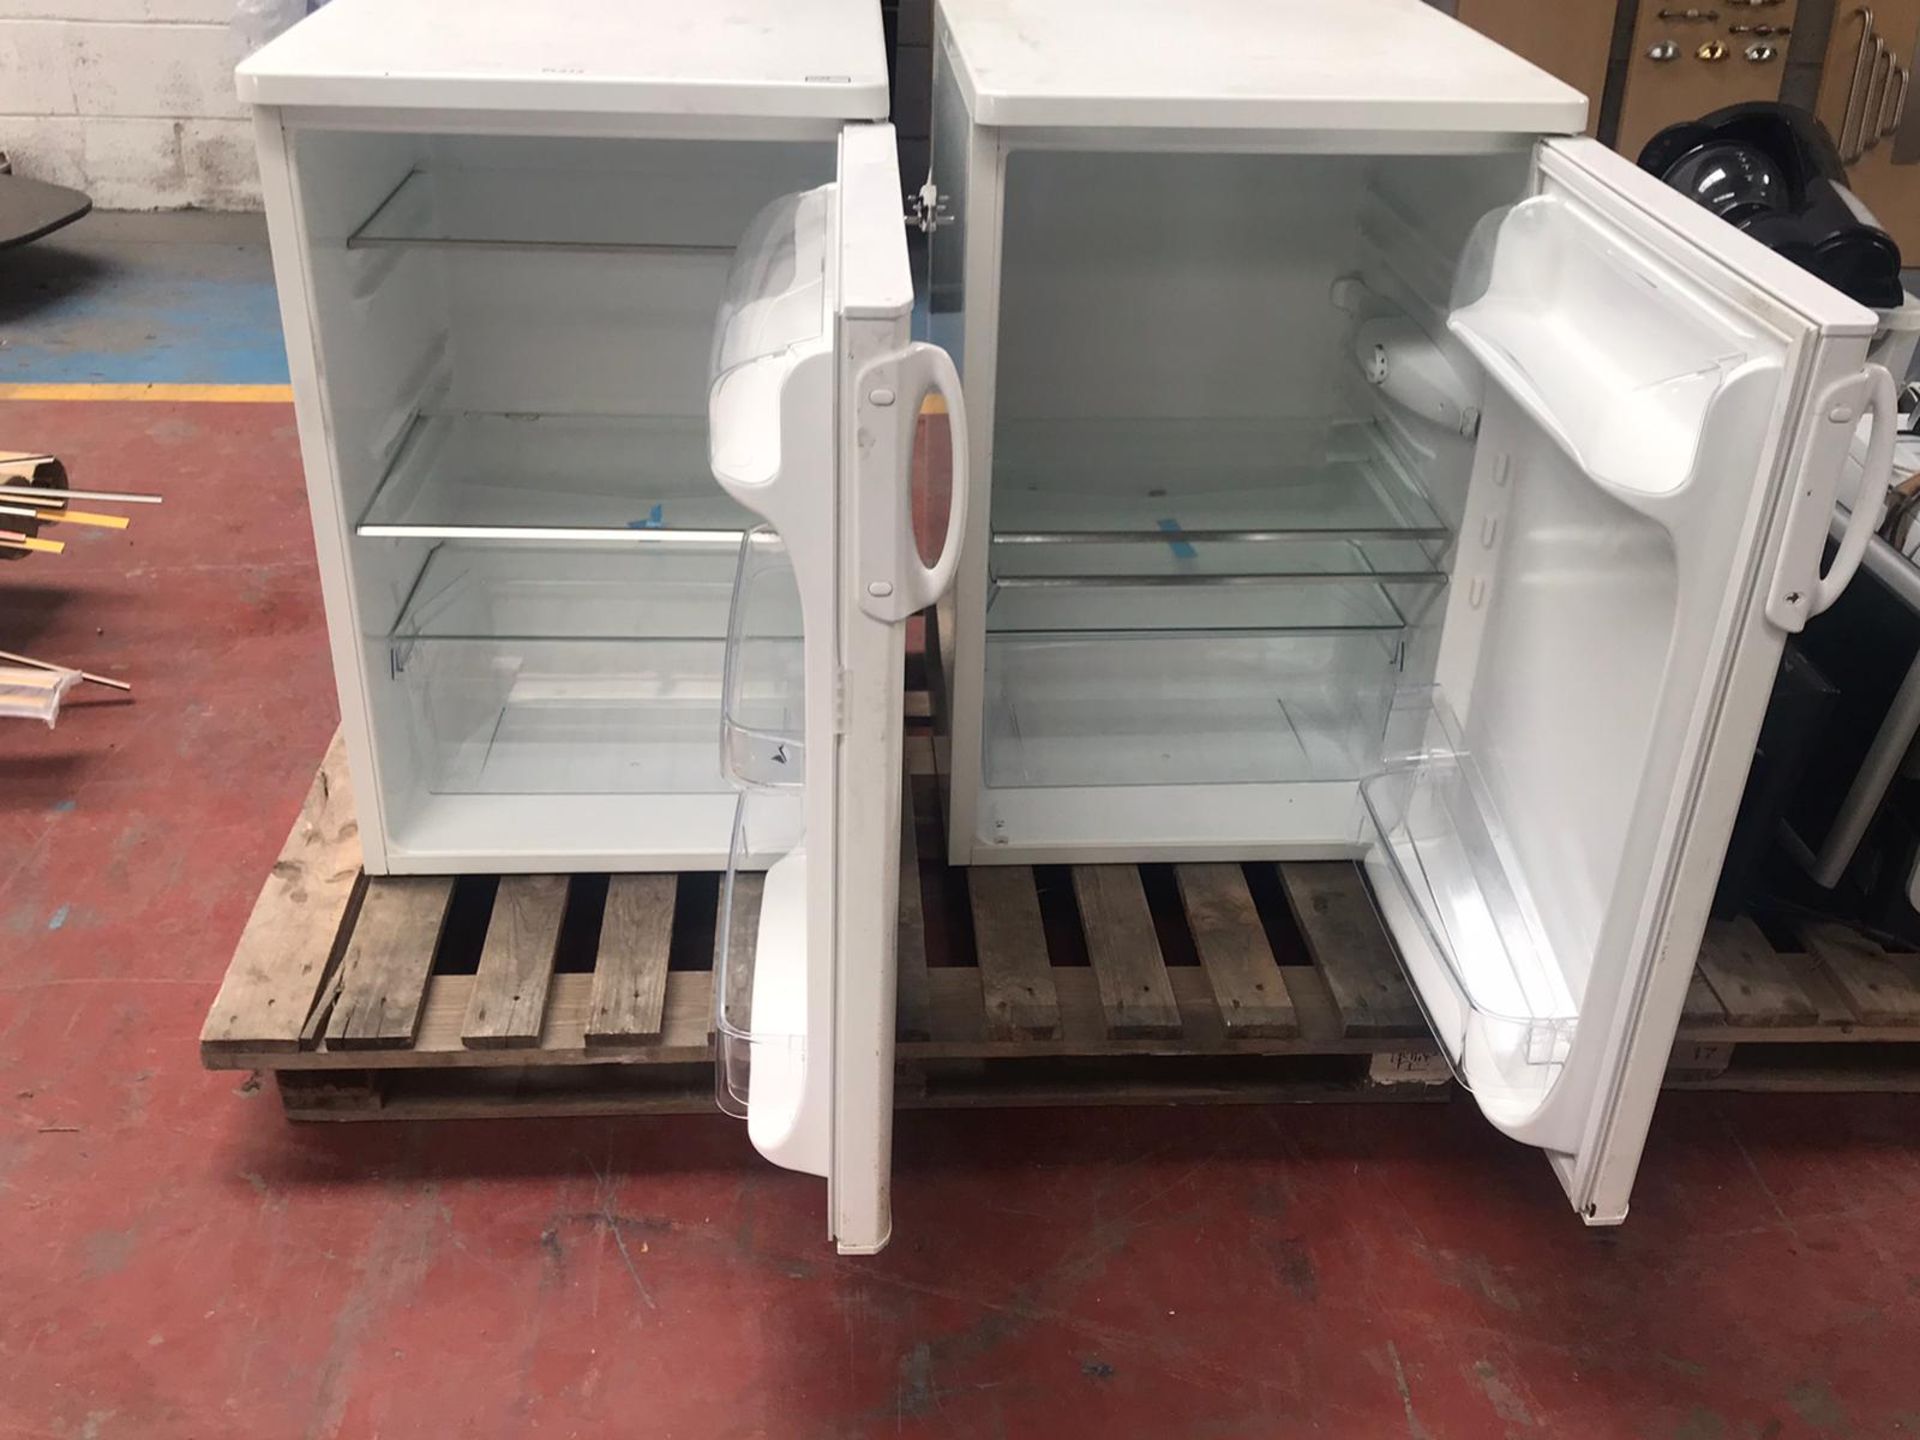 2 x Zanussi Undercounter Fridges - Removed From a Working Environment - Product Code: N/A - - Image 2 of 6